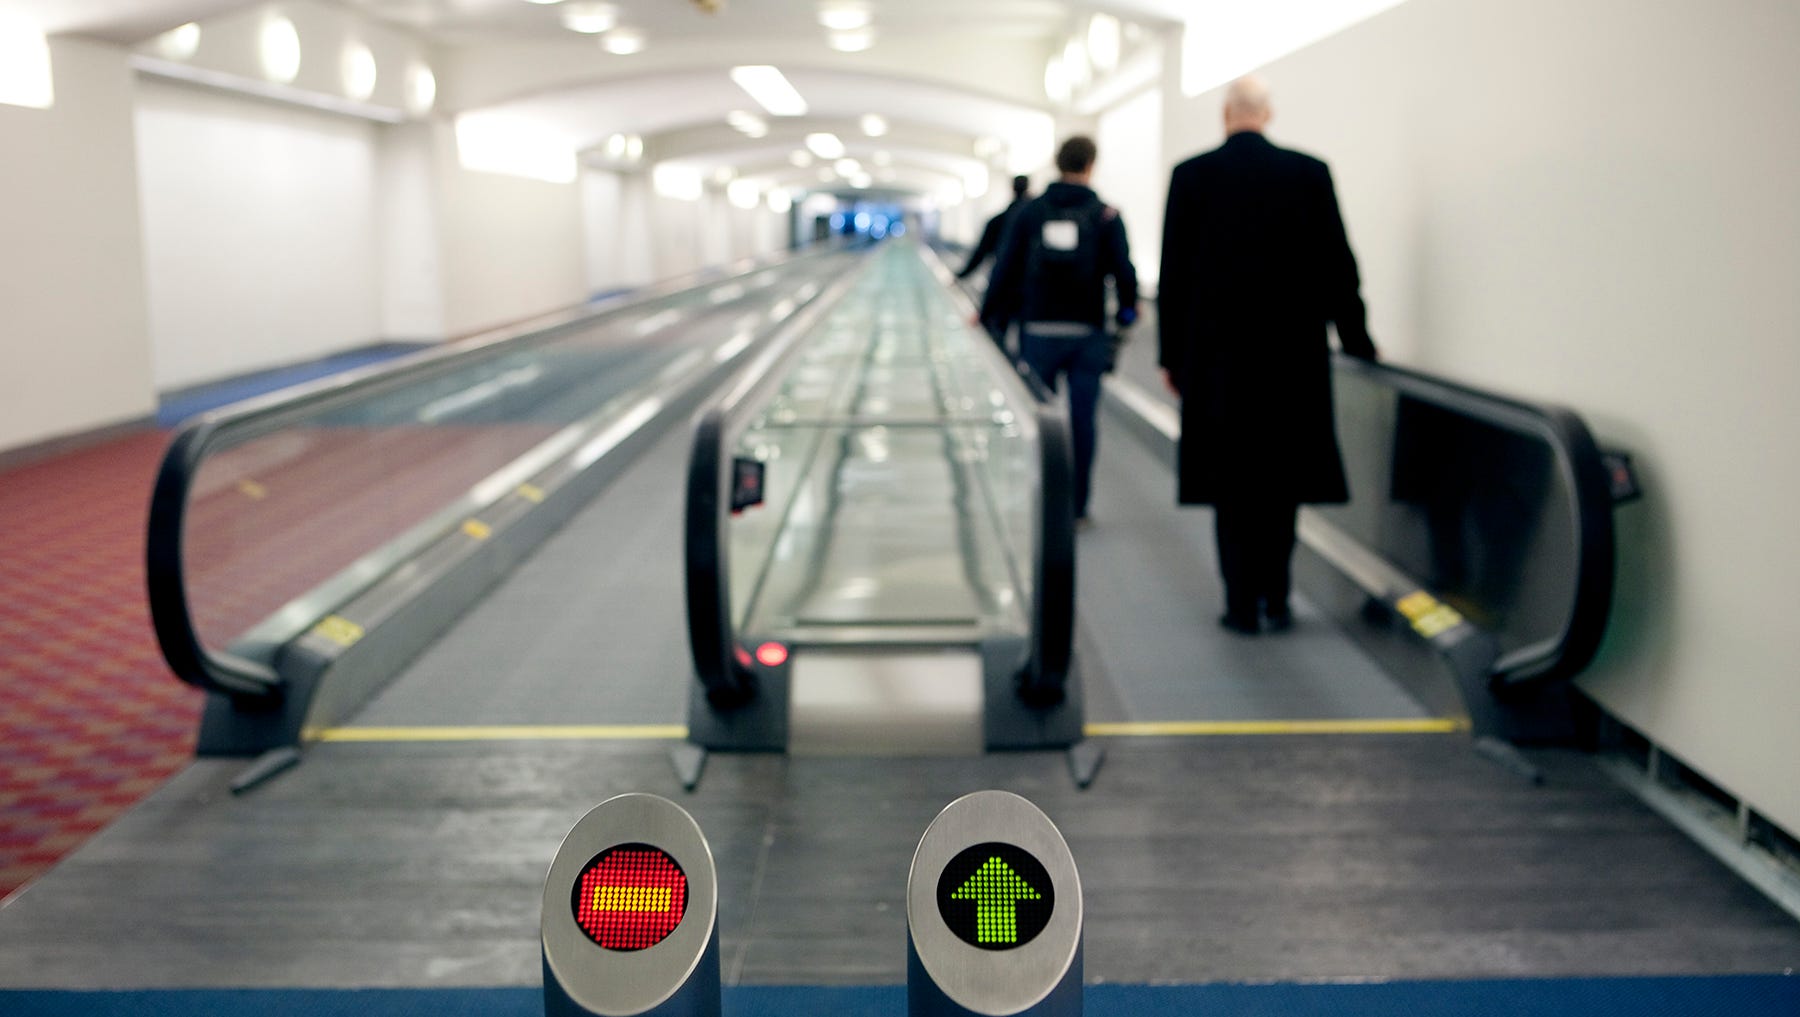 636105942986884058-Portland-International-Airport-received-a-special-variance-to-install-an-energy-saving-stop-start-motion-activatied-moving-walkway.-Courtesy--Port-of-Portland.jpg